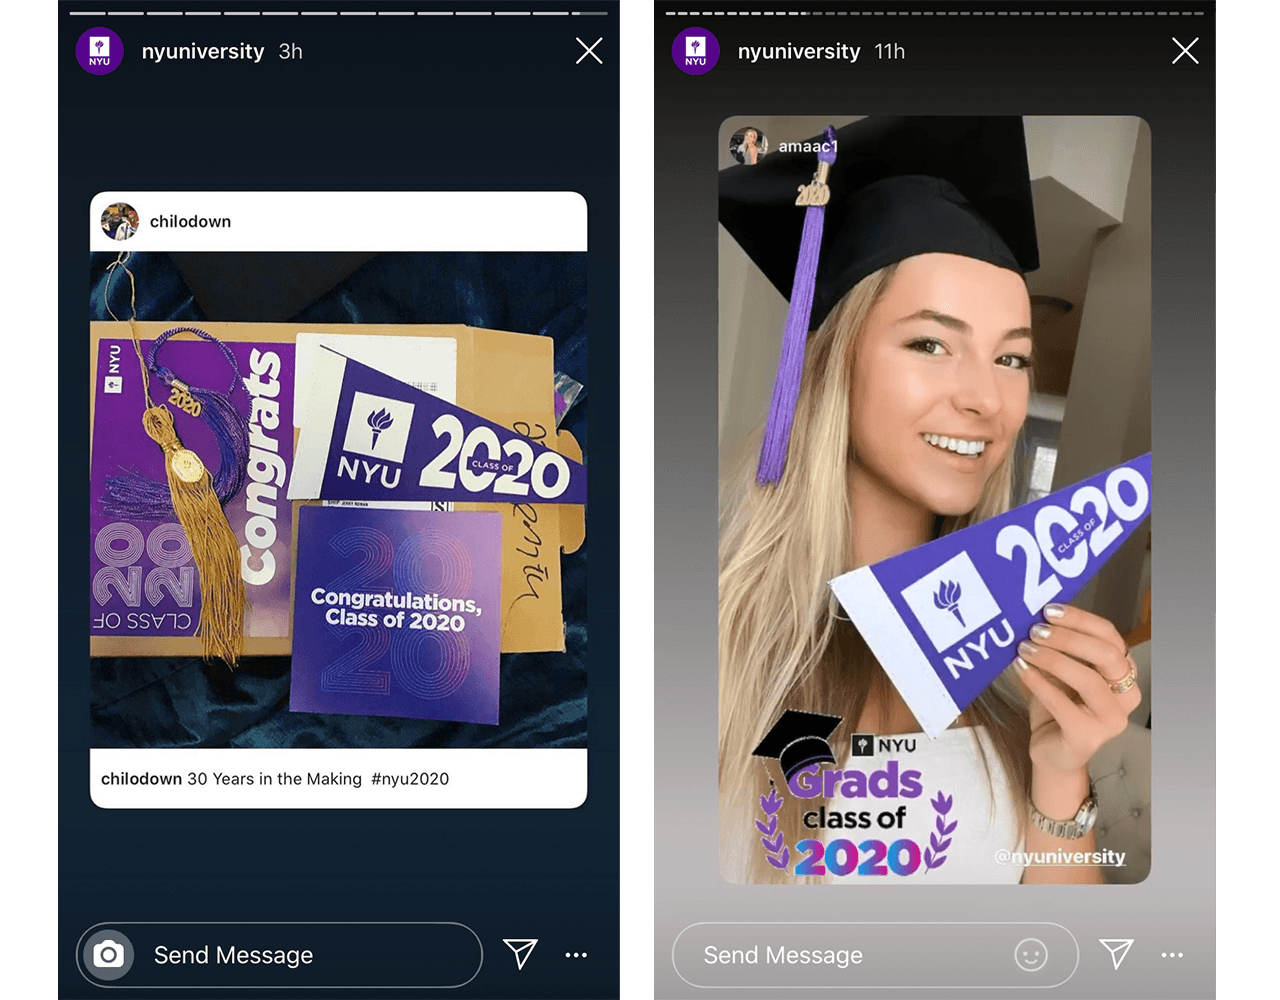 Right: printed material sent to students to celebrate graduation. Left: a student wearing their graduation cap and holding up an NYU flag.